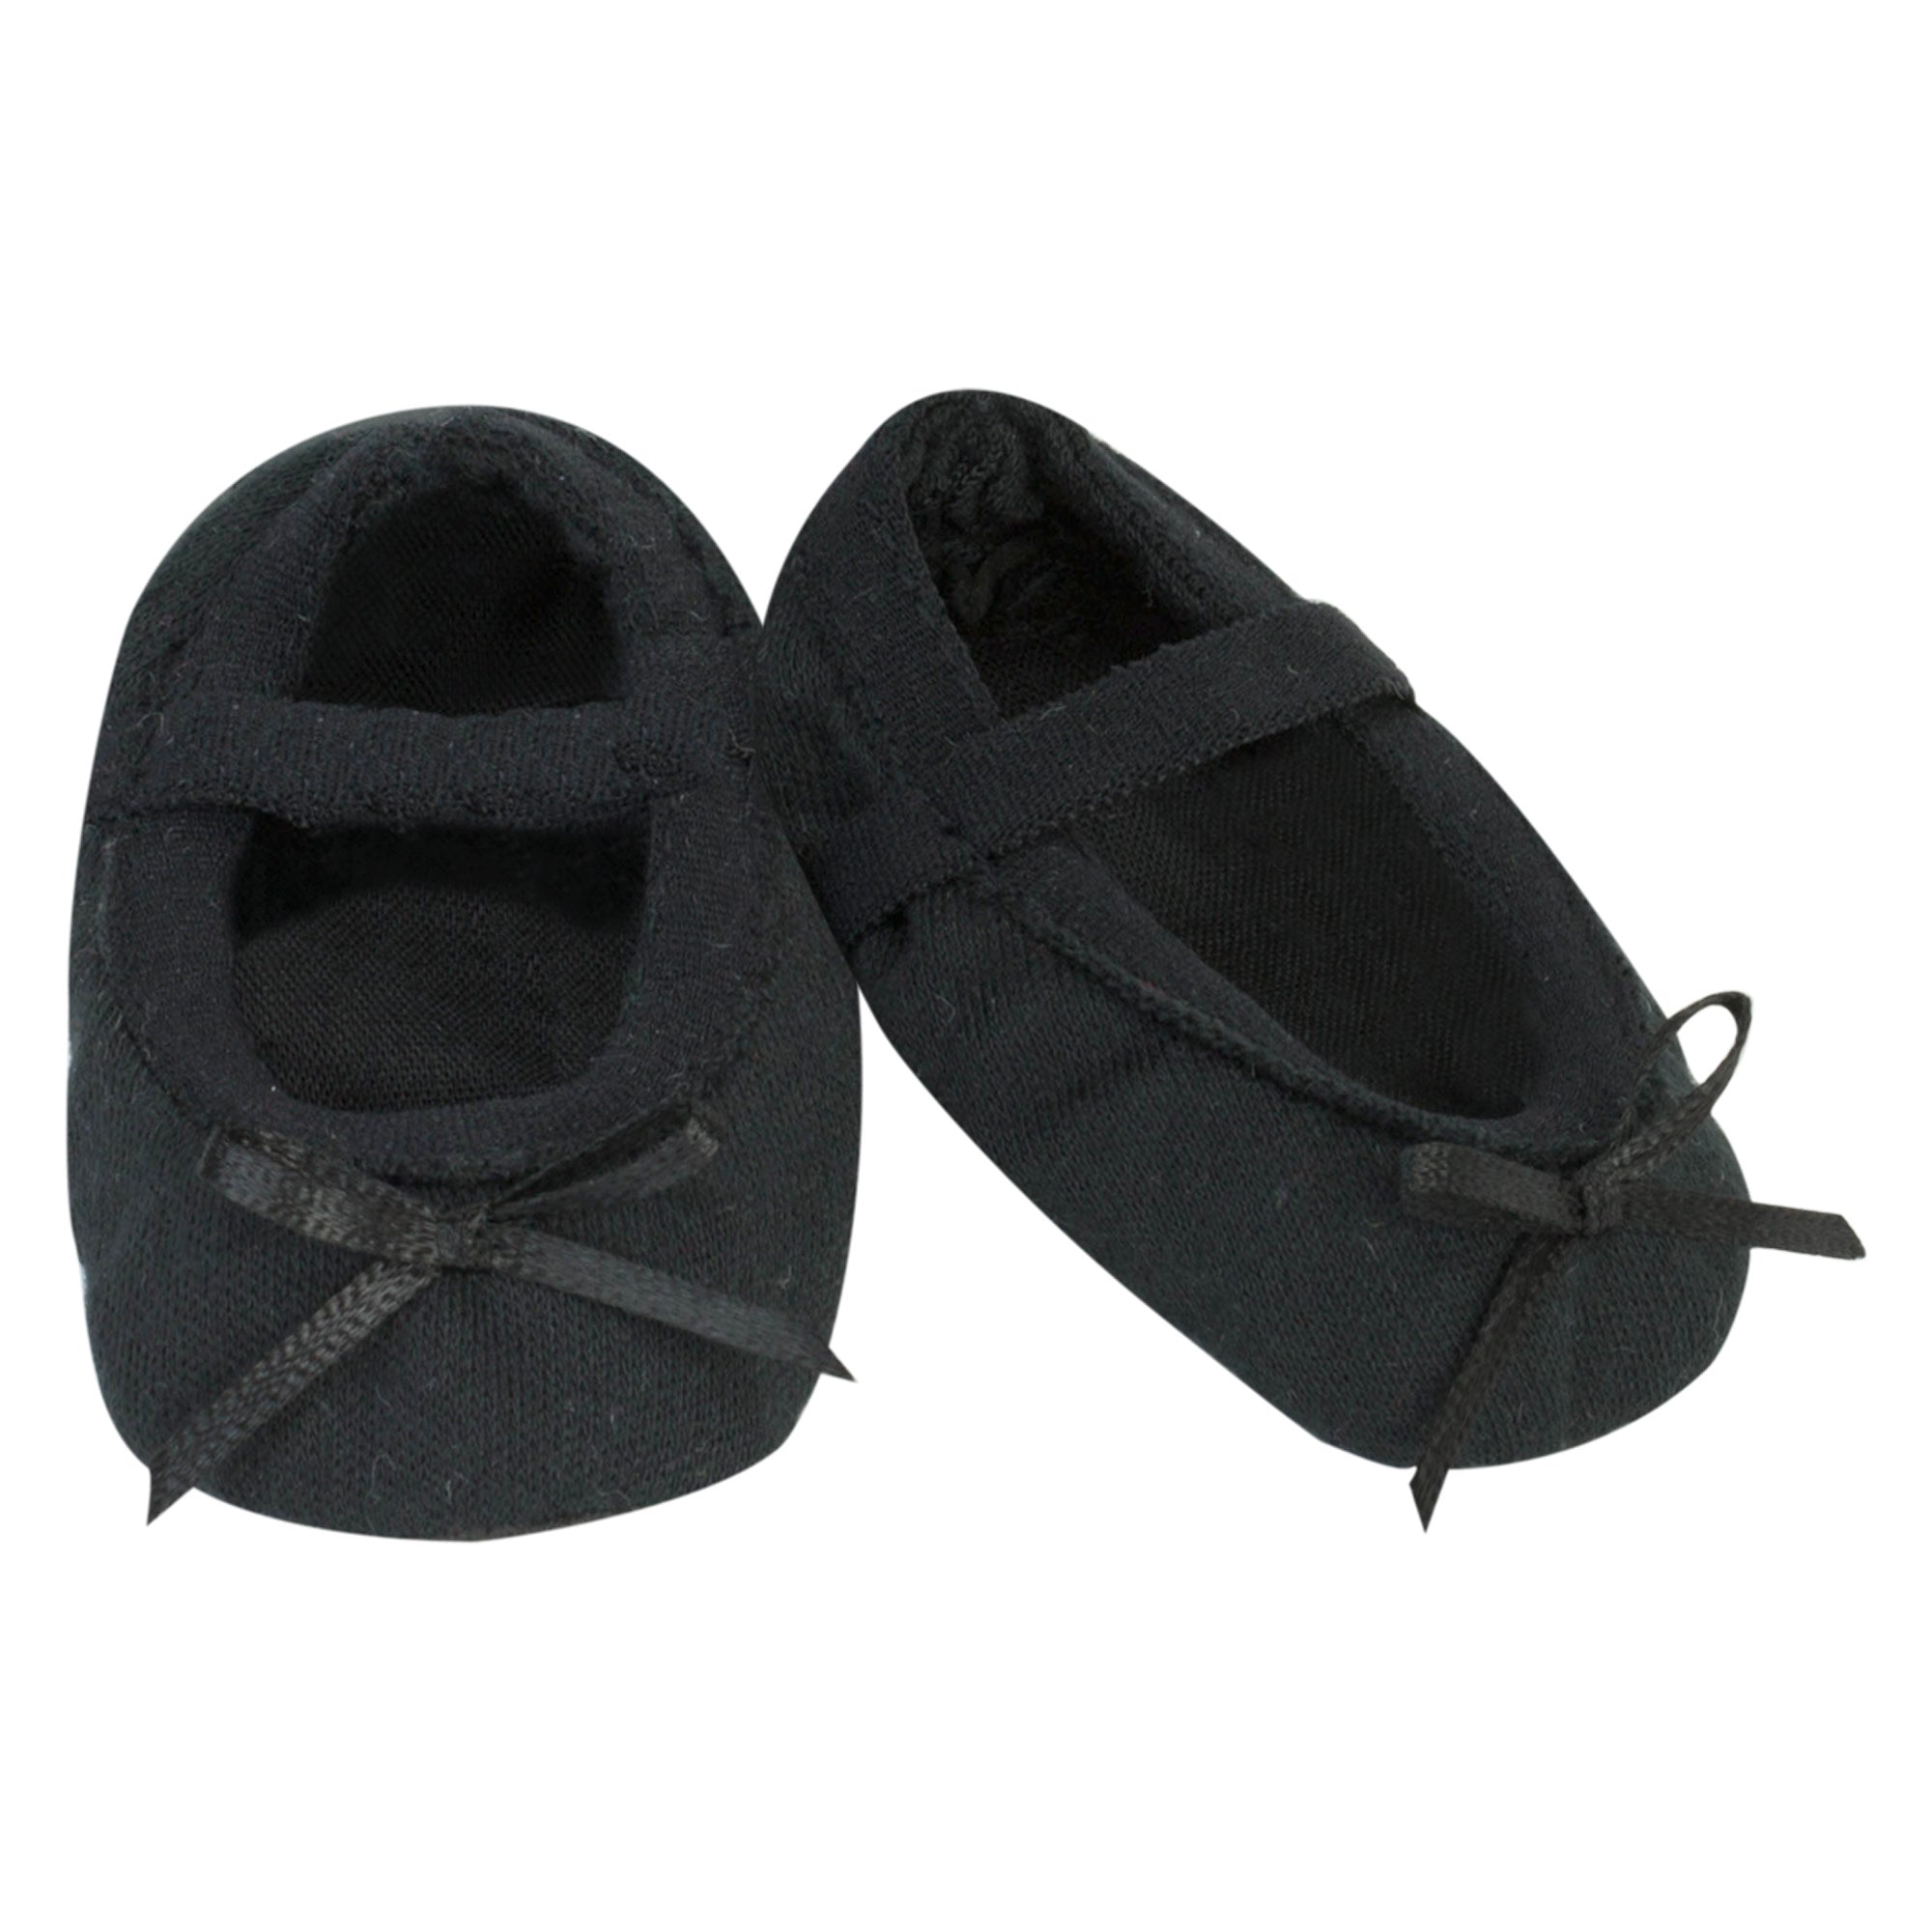 Sophia’s Cute Basic Solid-Colored Mix & Match Ballet Slipper Shoes with Bow Accents for 18” Dolls, Black